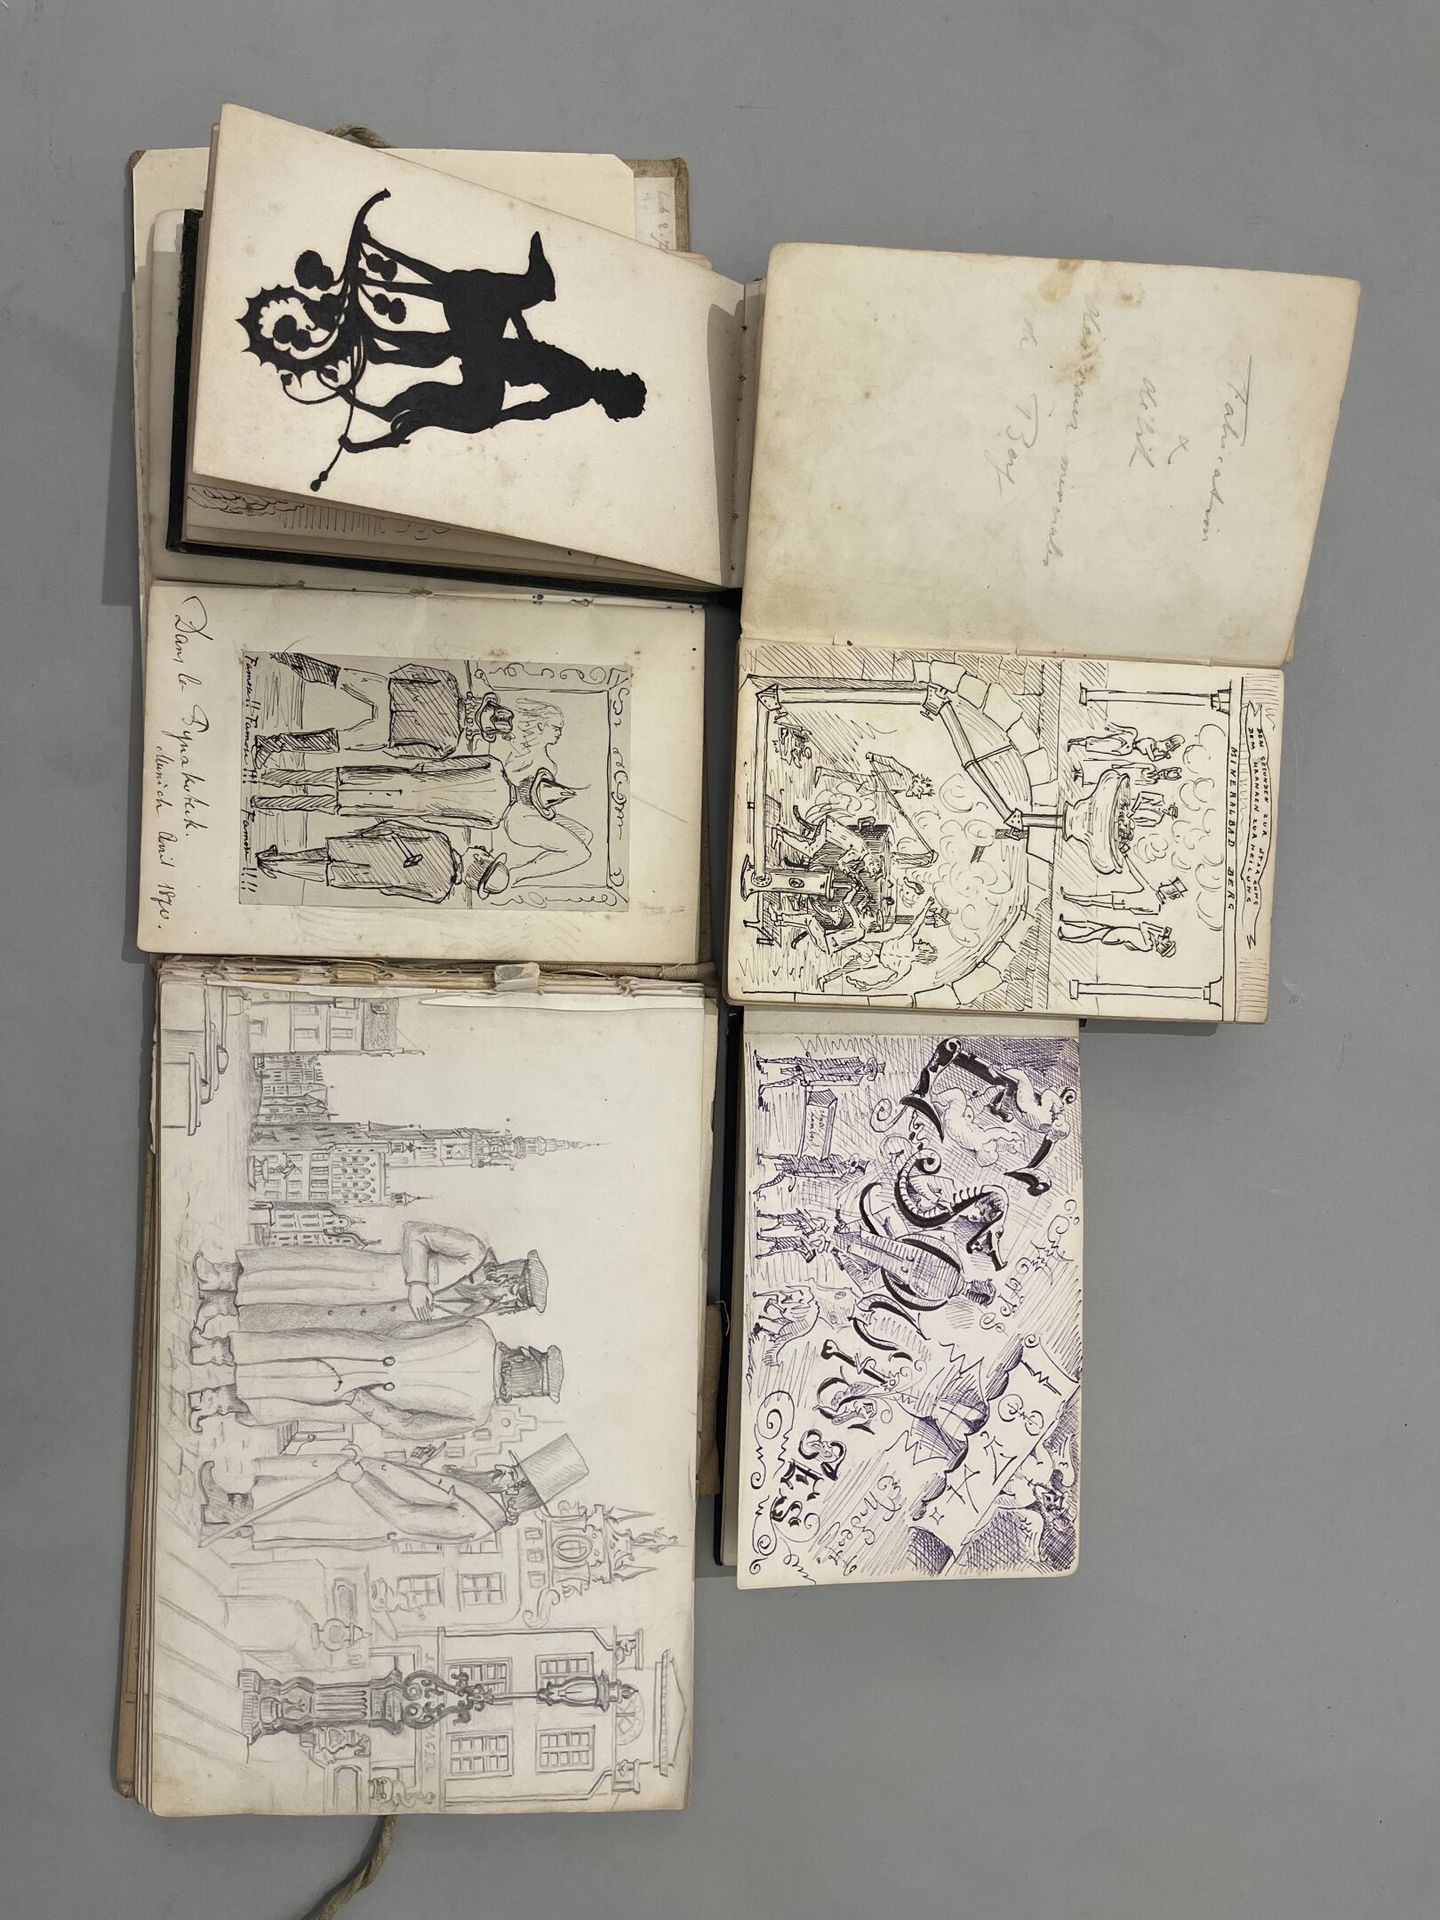 Null André LAMBERT (1851-1929)
Five small notebooks of caricatures (1870-1874).